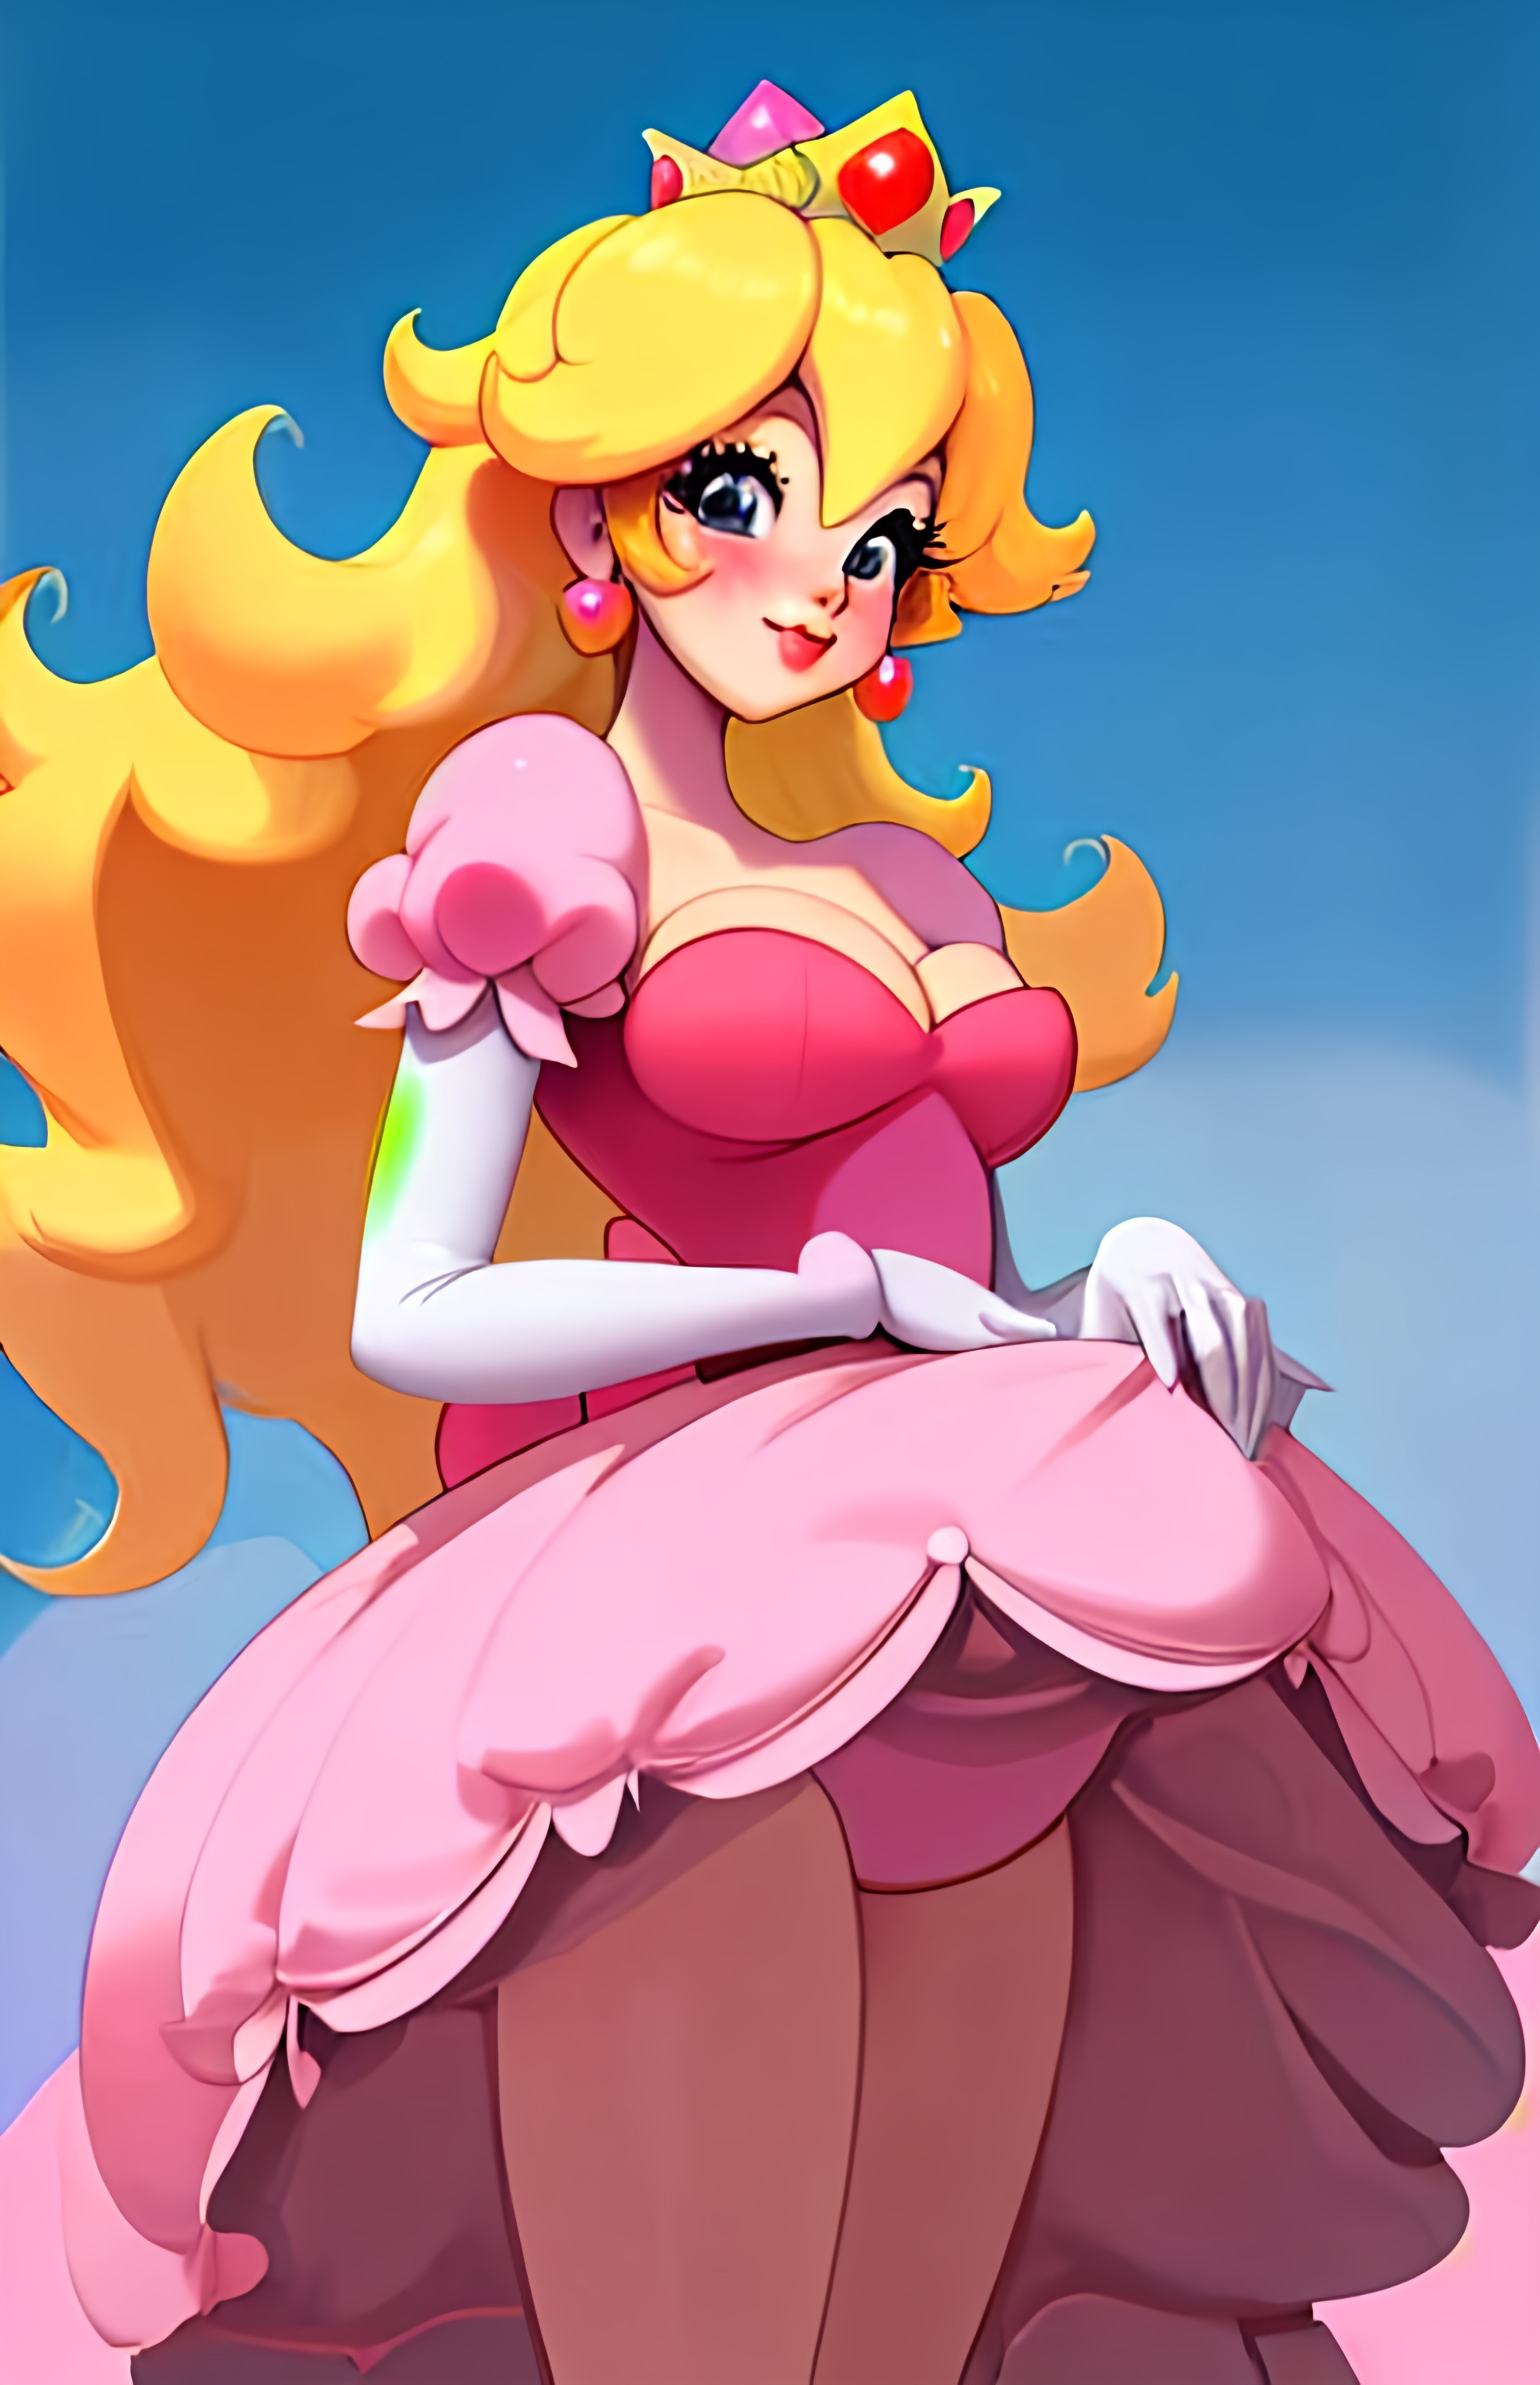 cleveland forde recommends Fan Art Princess Peach